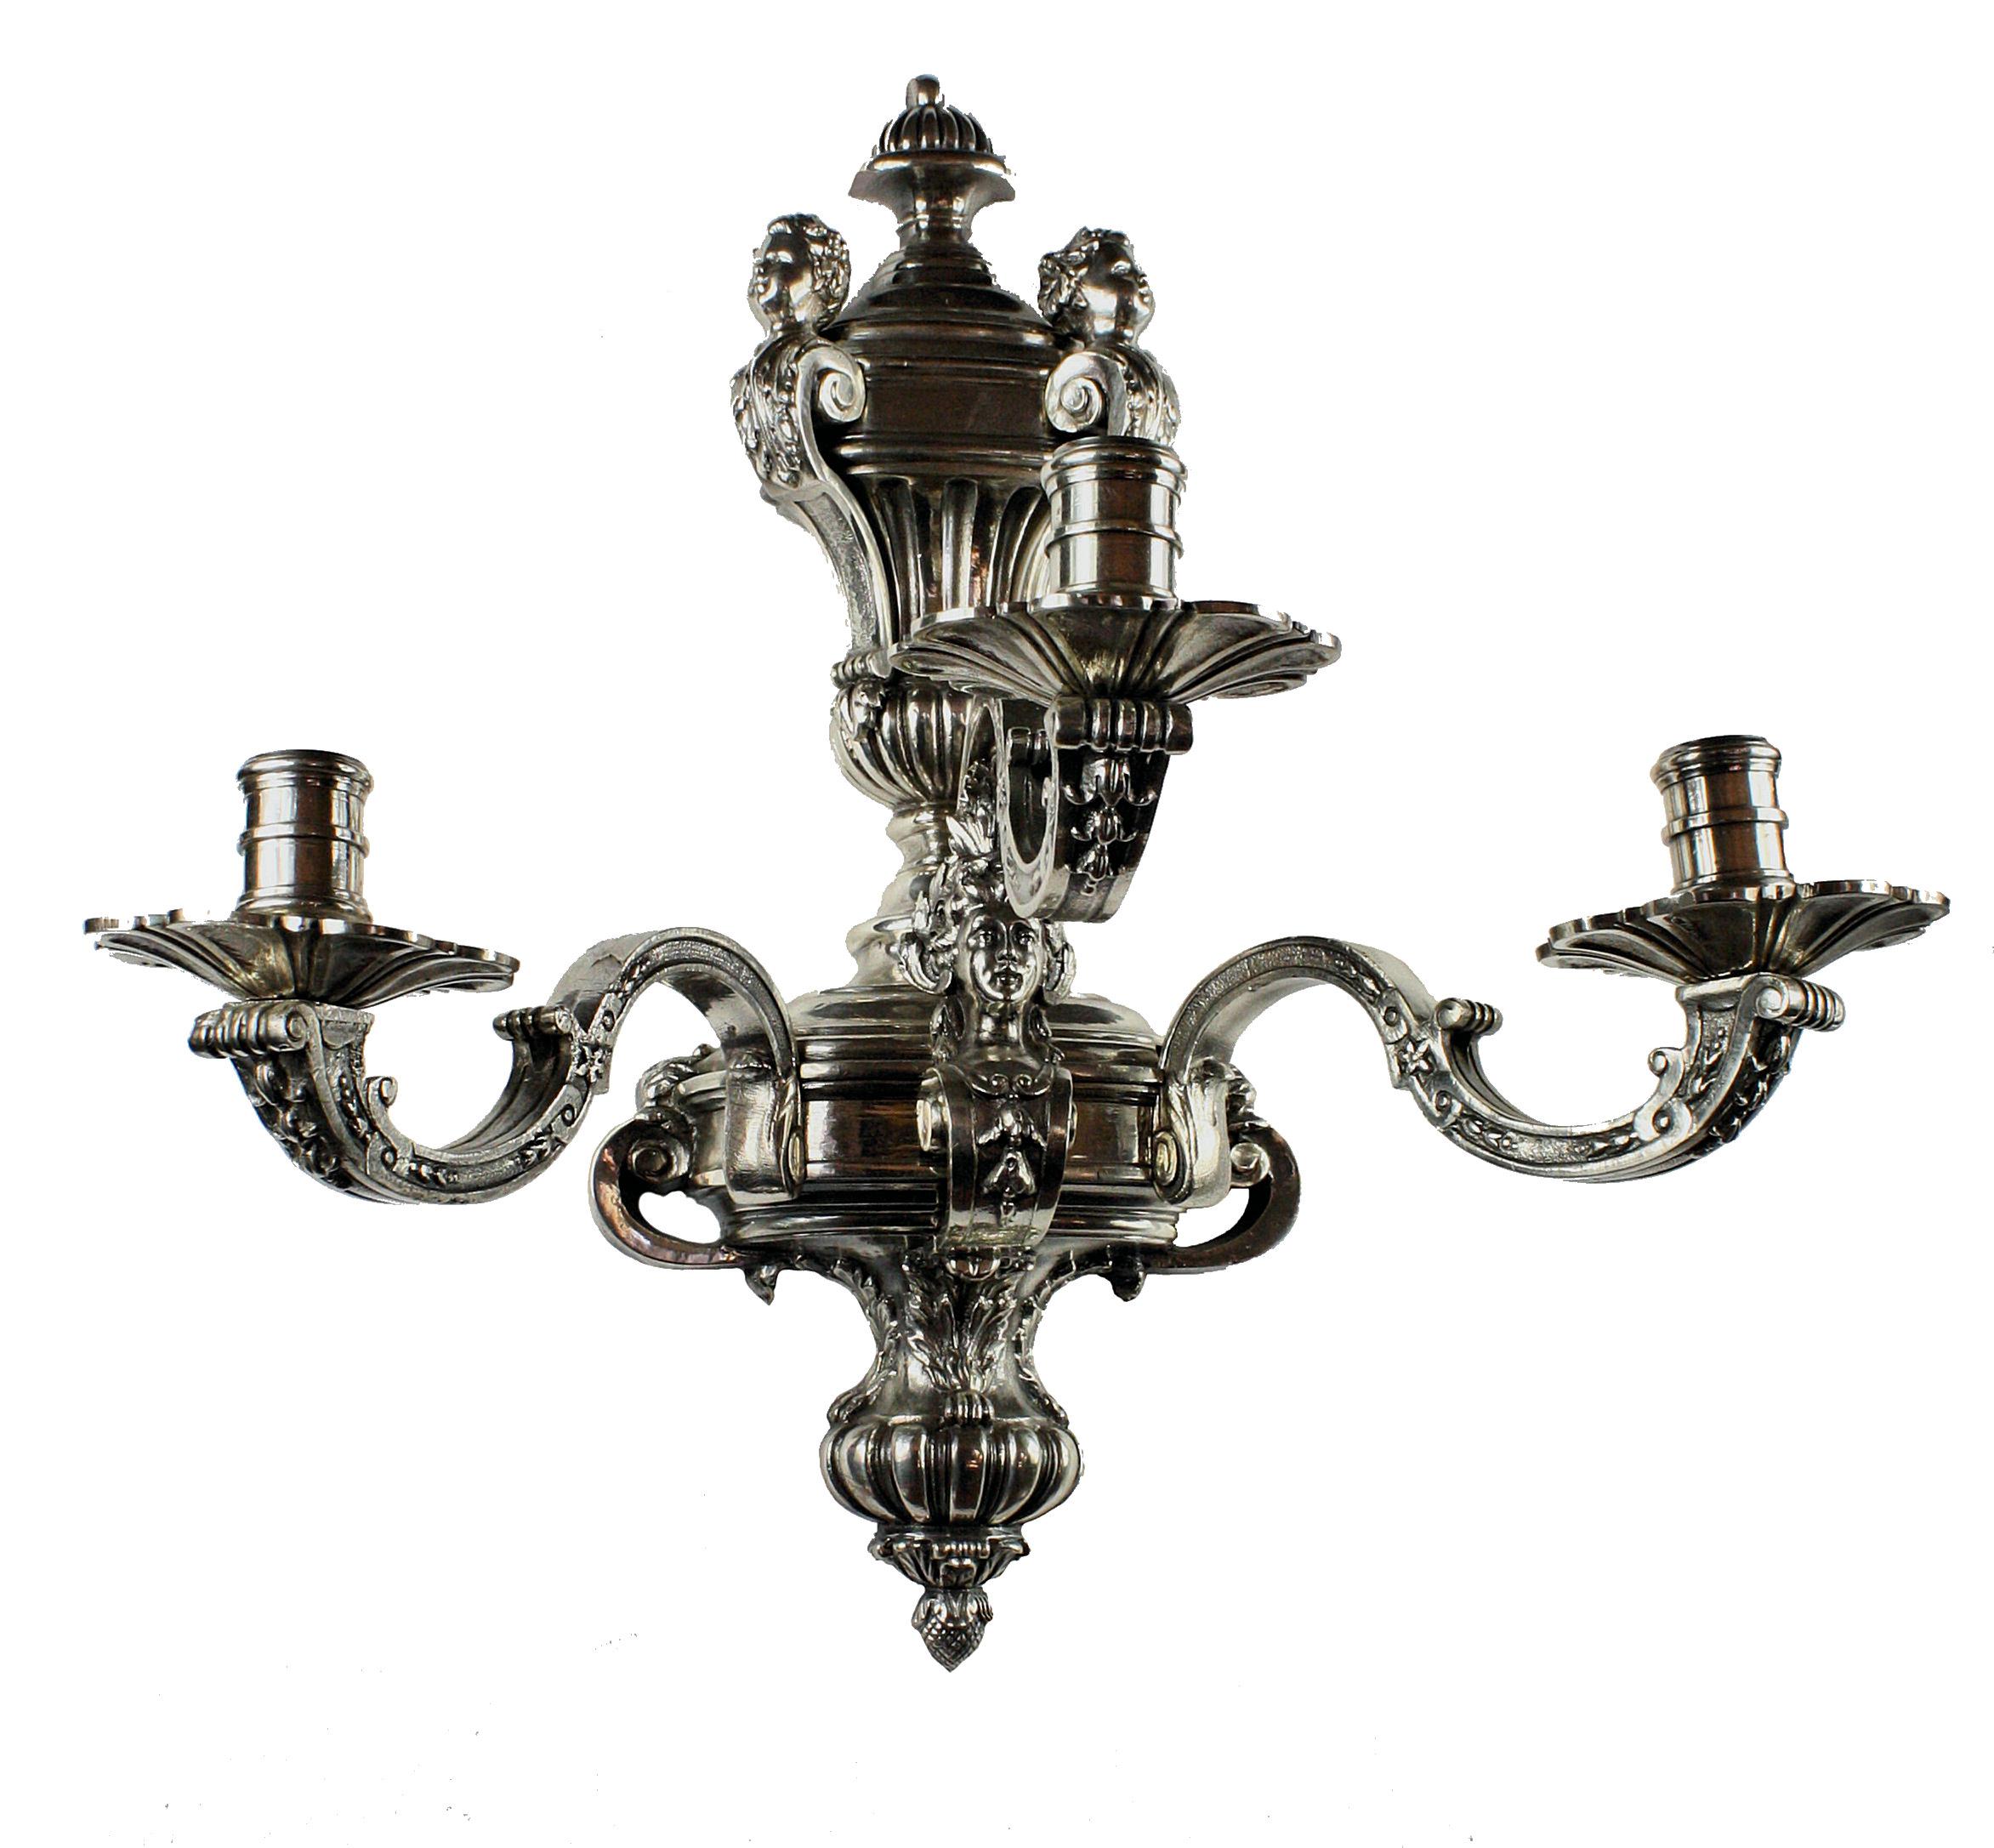 A pair of fine English, silver plated bronze copies of the Knole wall light. These are 19th century copies and the quality of the bronze work and burnishing is superb. Inferior copies of the Knole lights became fashionable in the 1920s and 1930s but